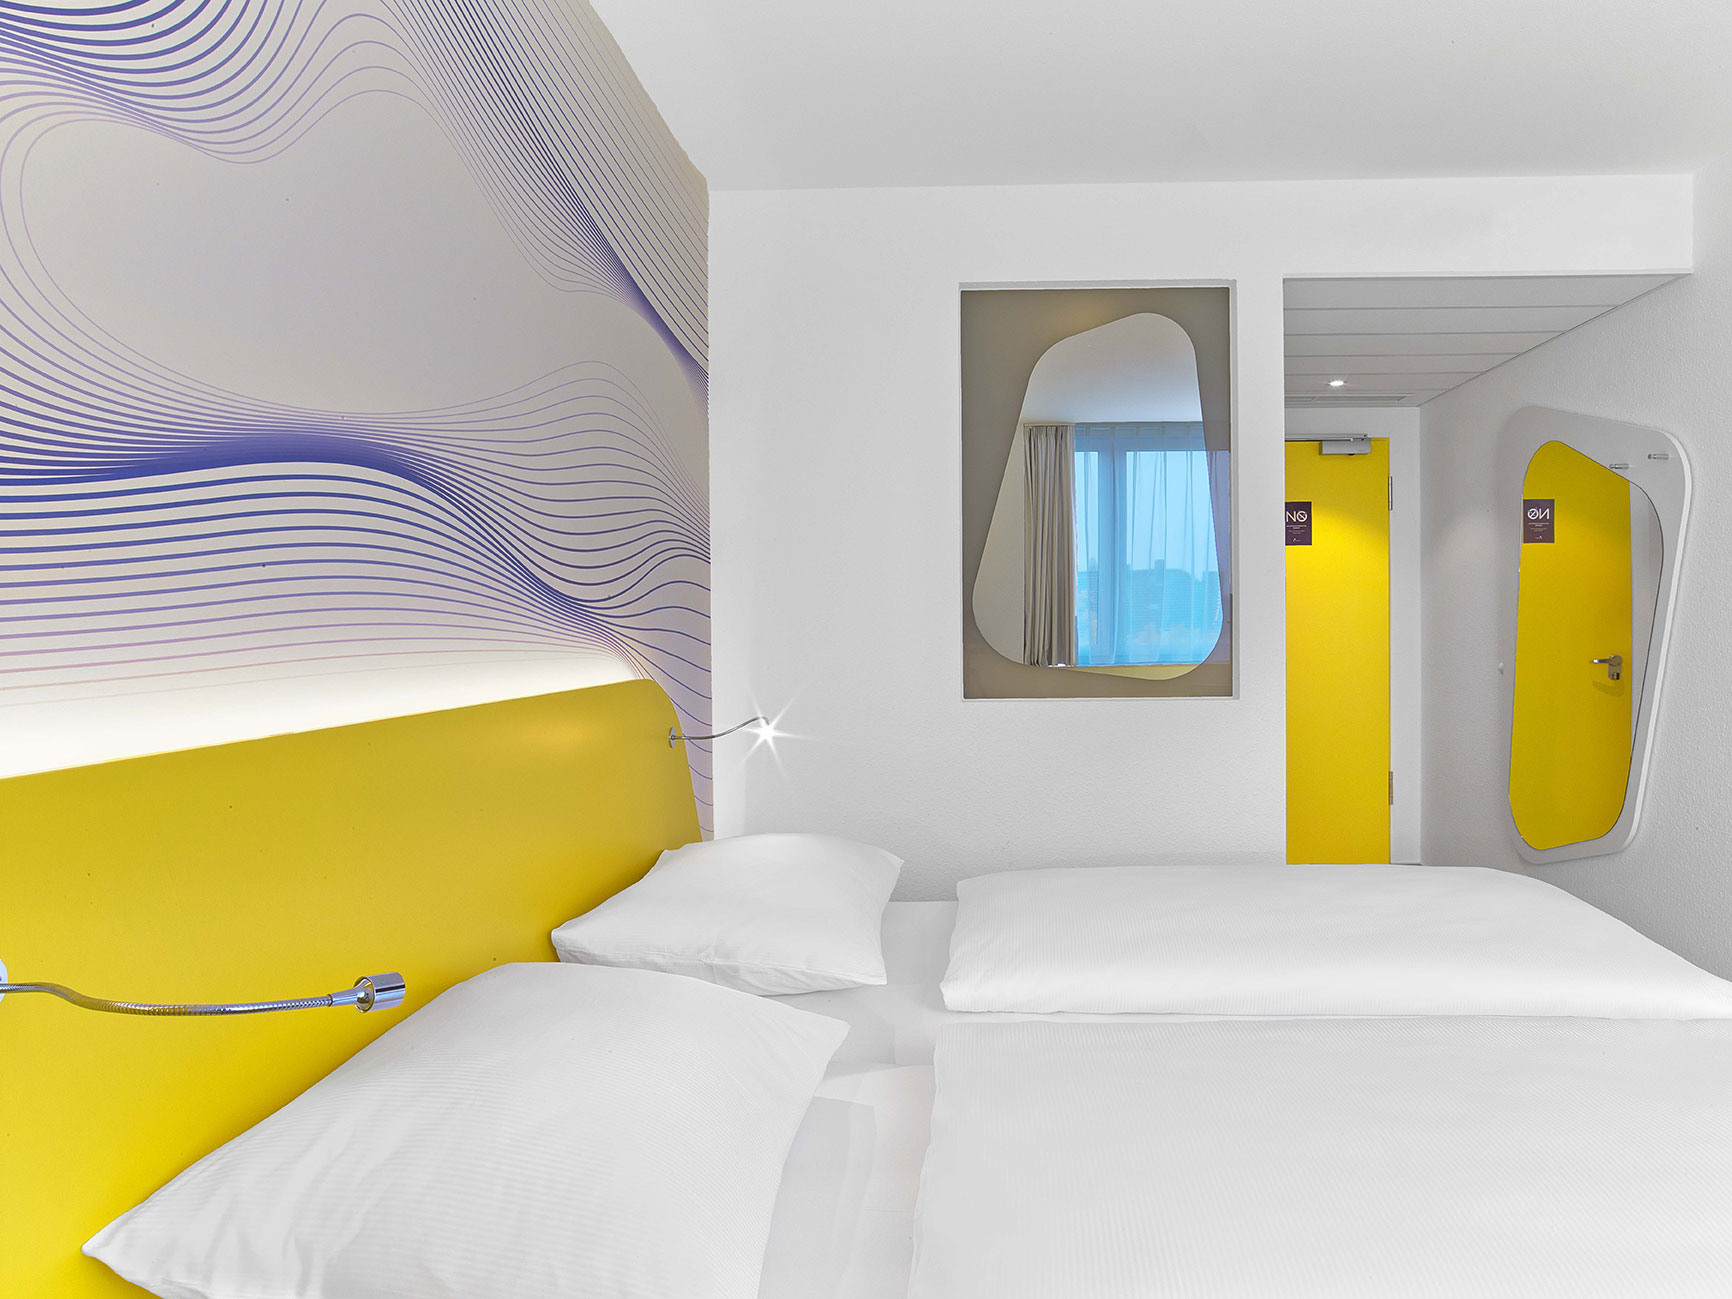 Design room in Hanover with yellow and purple colours, a double bed and a curved mirror